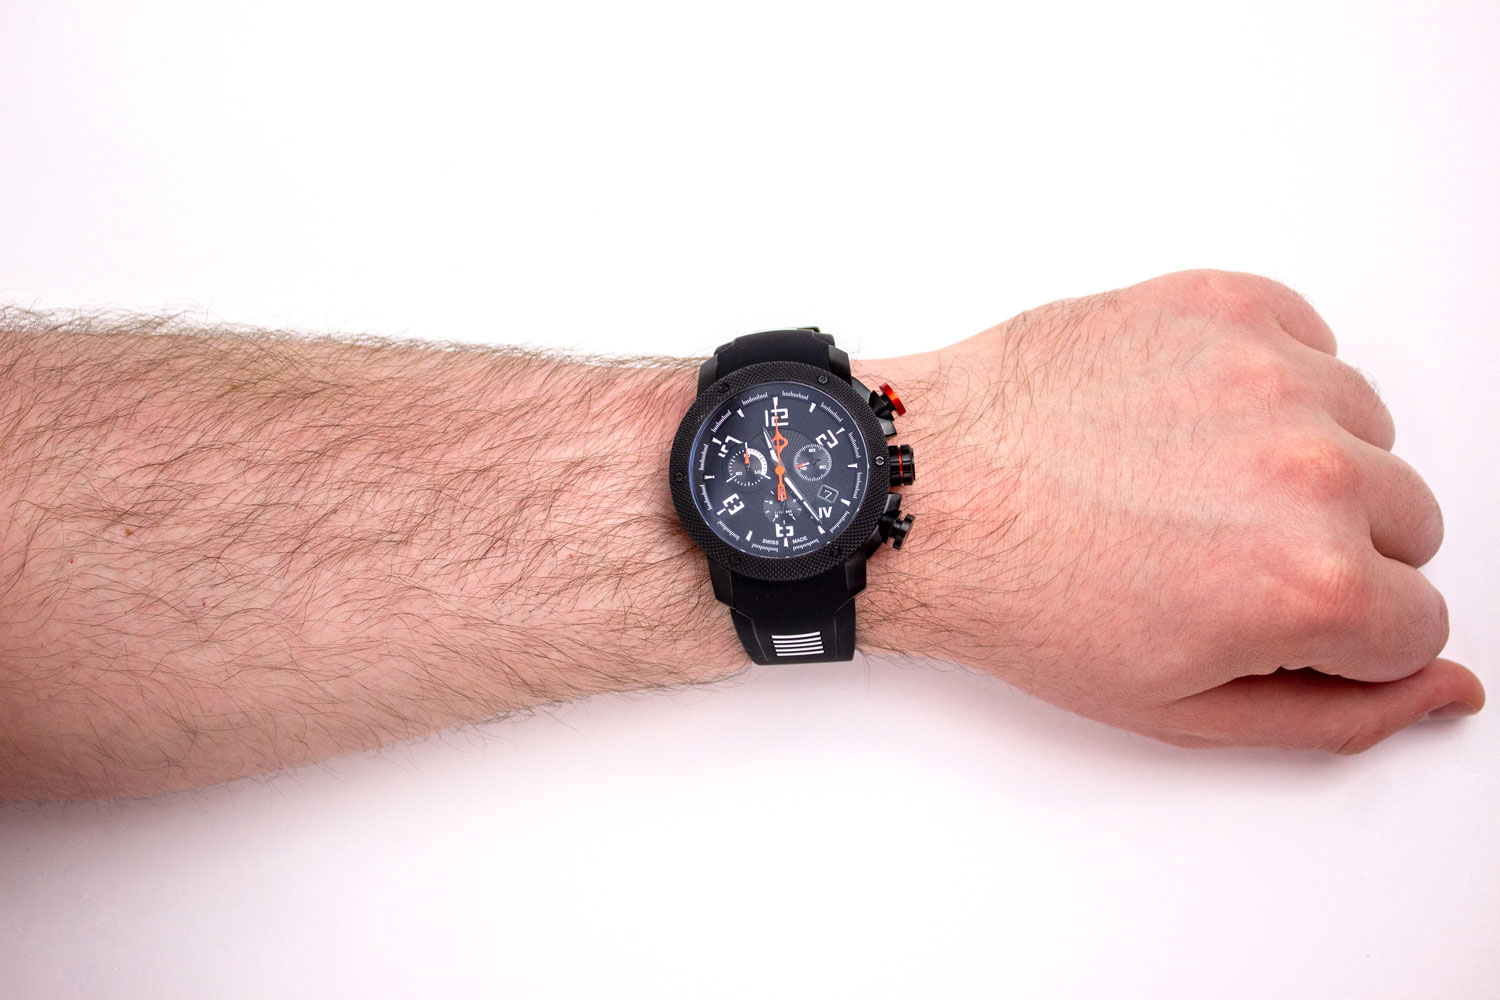 Photo of how the LIV GX1 fits on a 7.5 in (19.05 cm) wrist